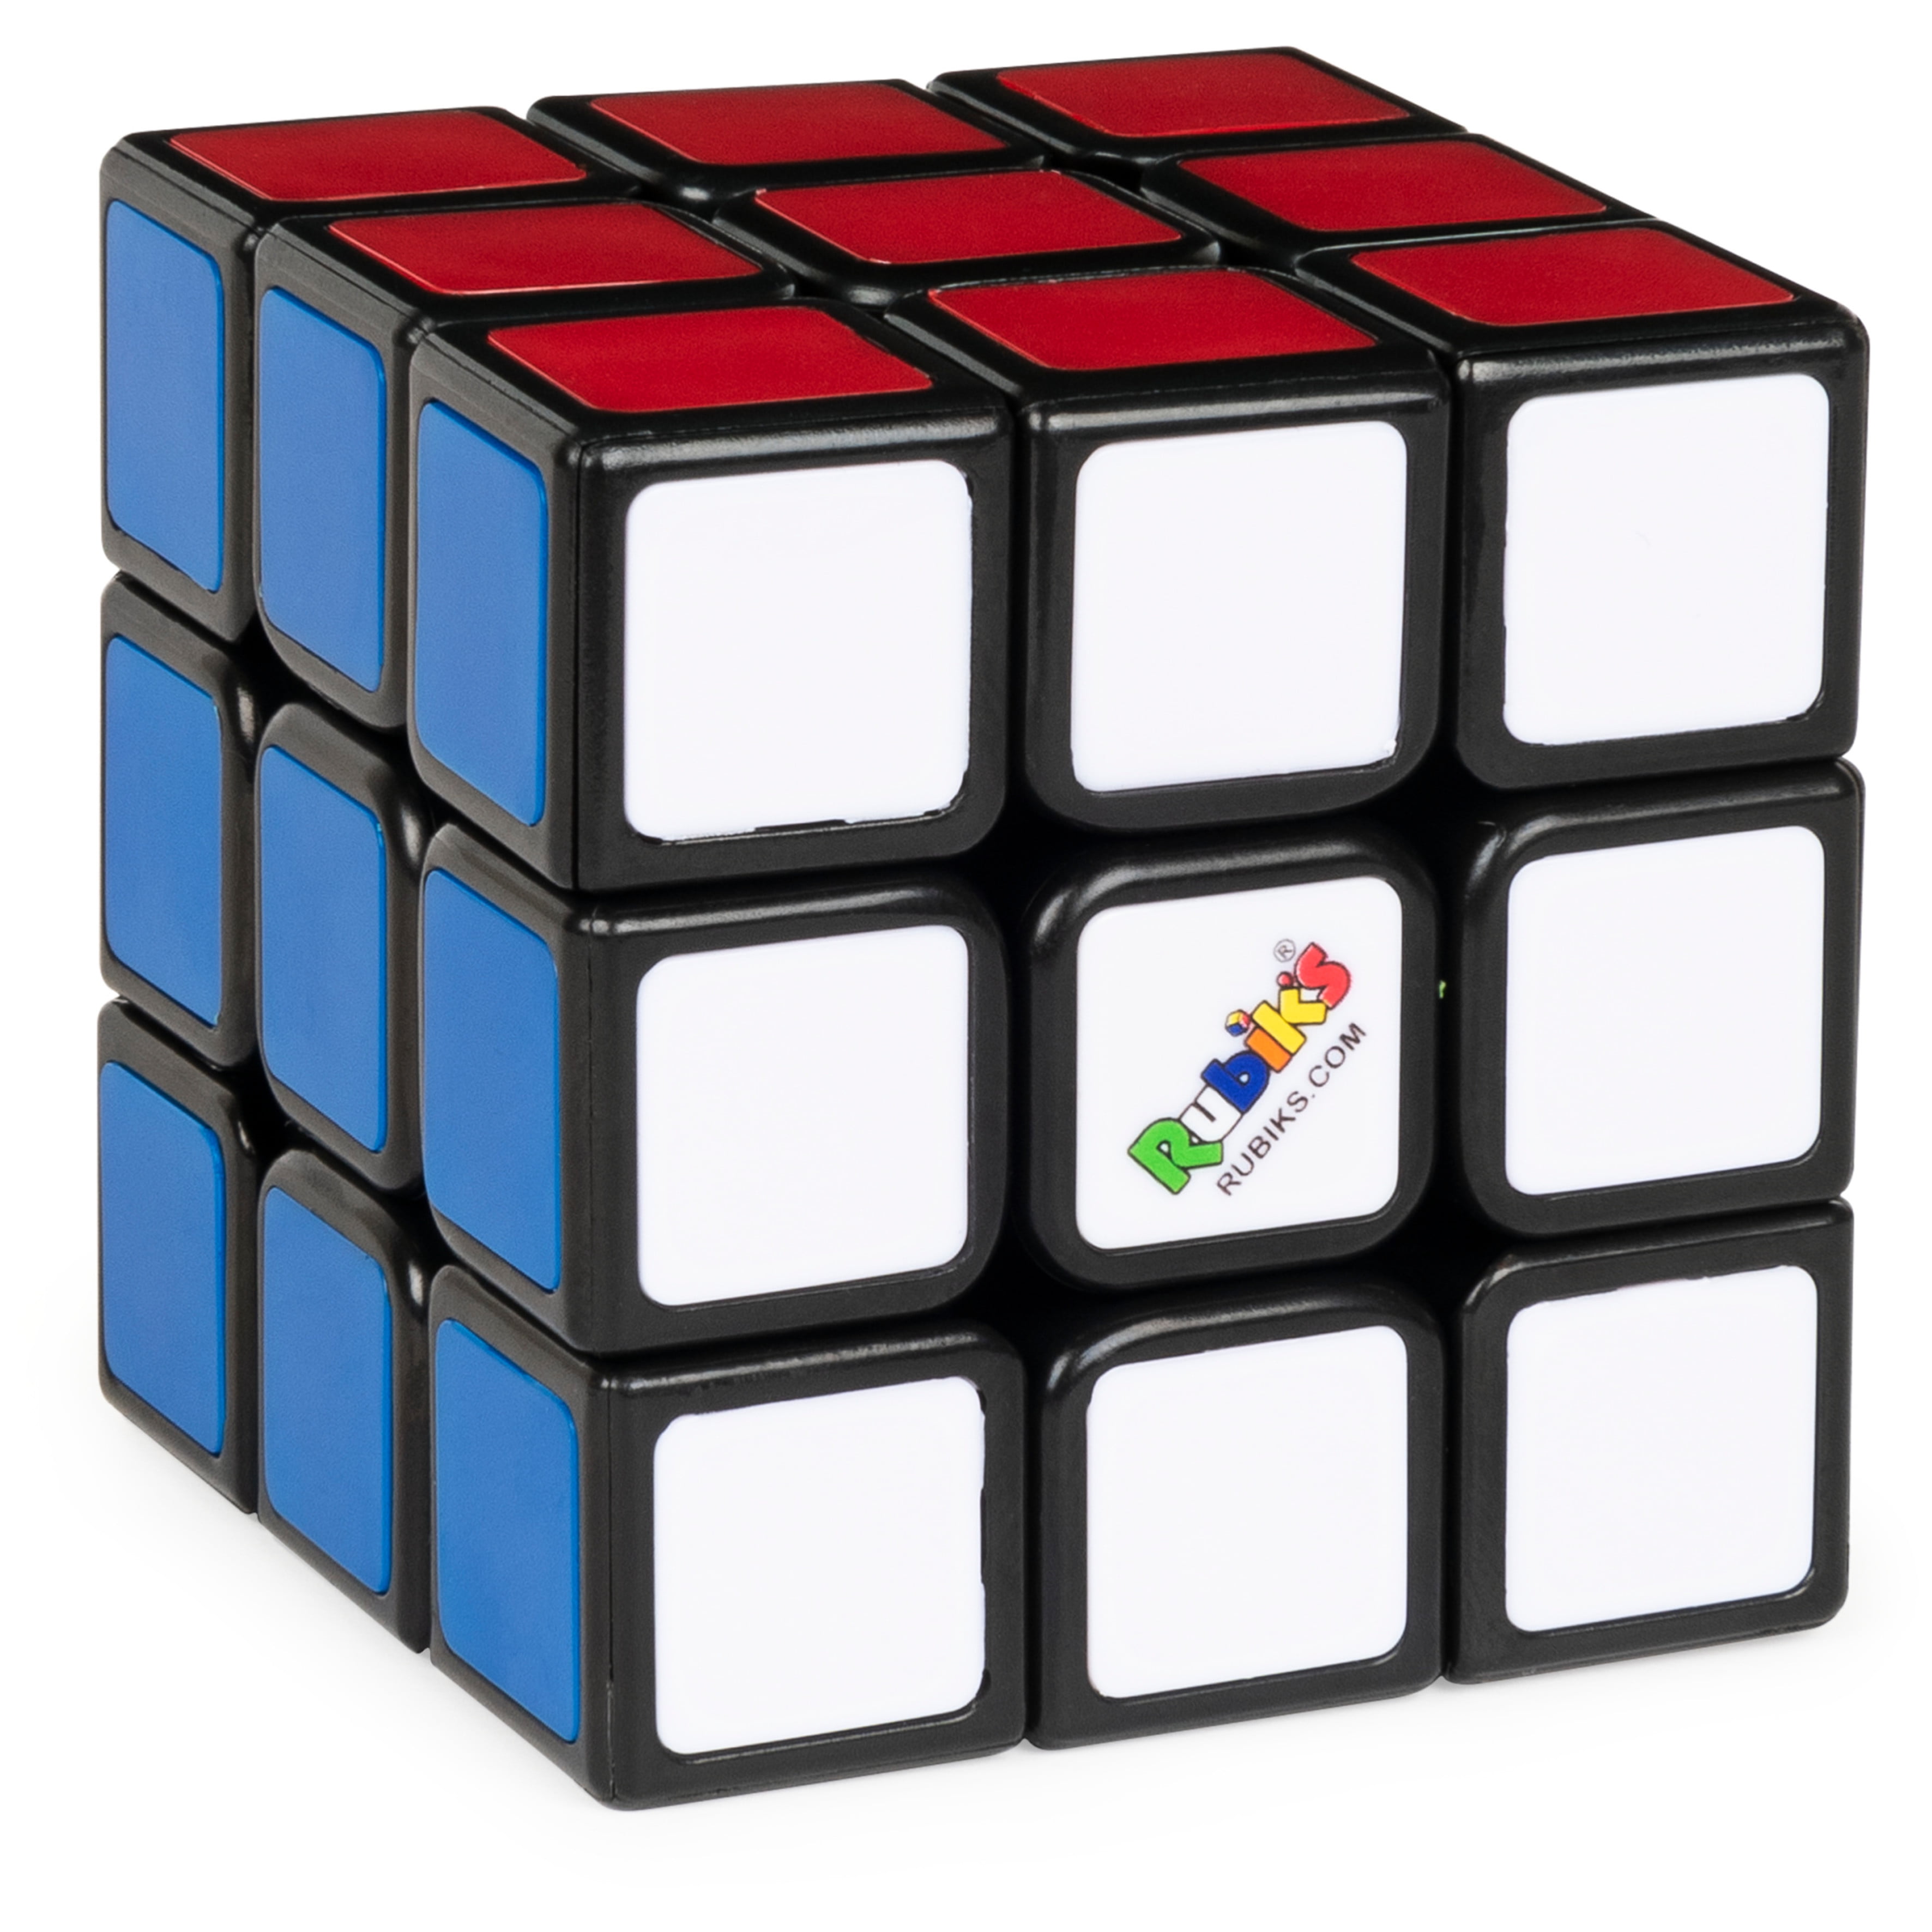 Rubiks Cube, The Original 3x3 Color-Matching Puzzle